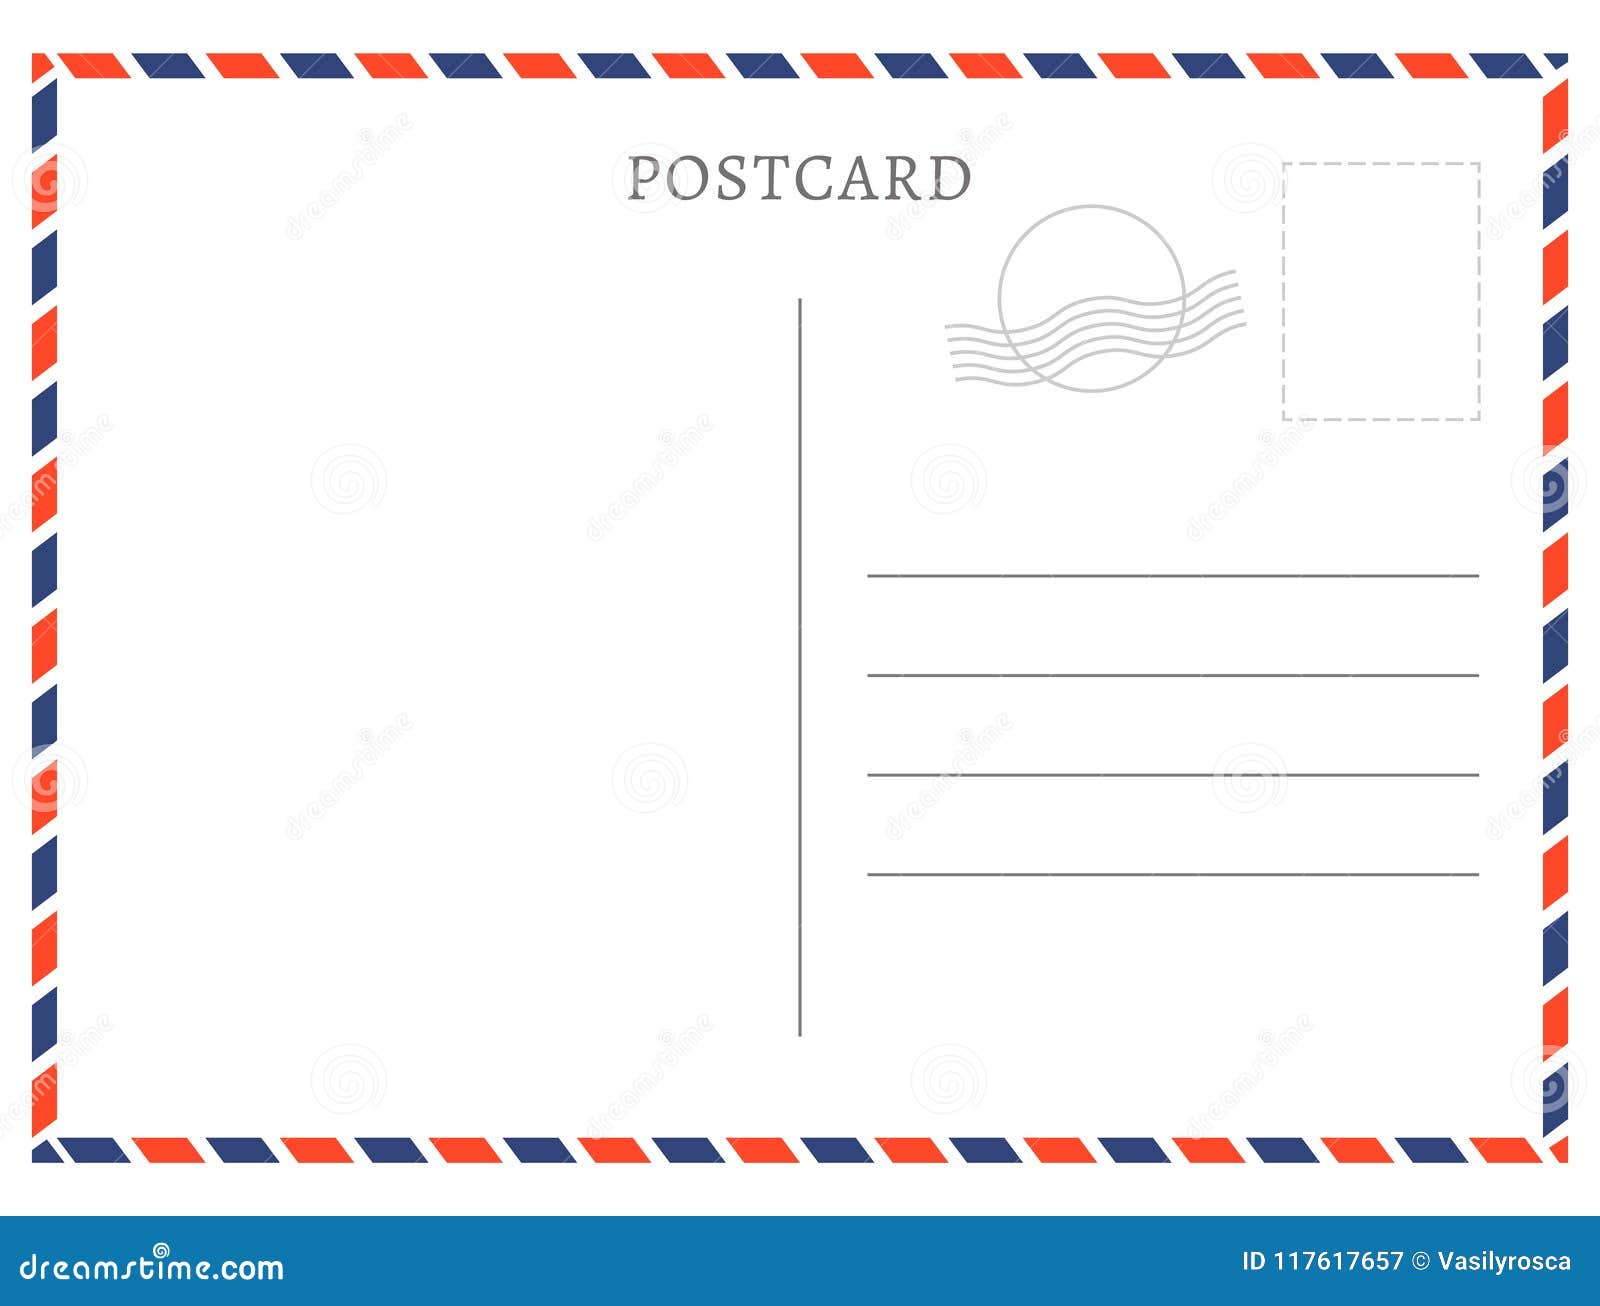 Postcard Template Paper White Texture Vector Postcard Empty Mail Stamp And Message Design Stock Vector Illustration Of Greeting Element 117617657